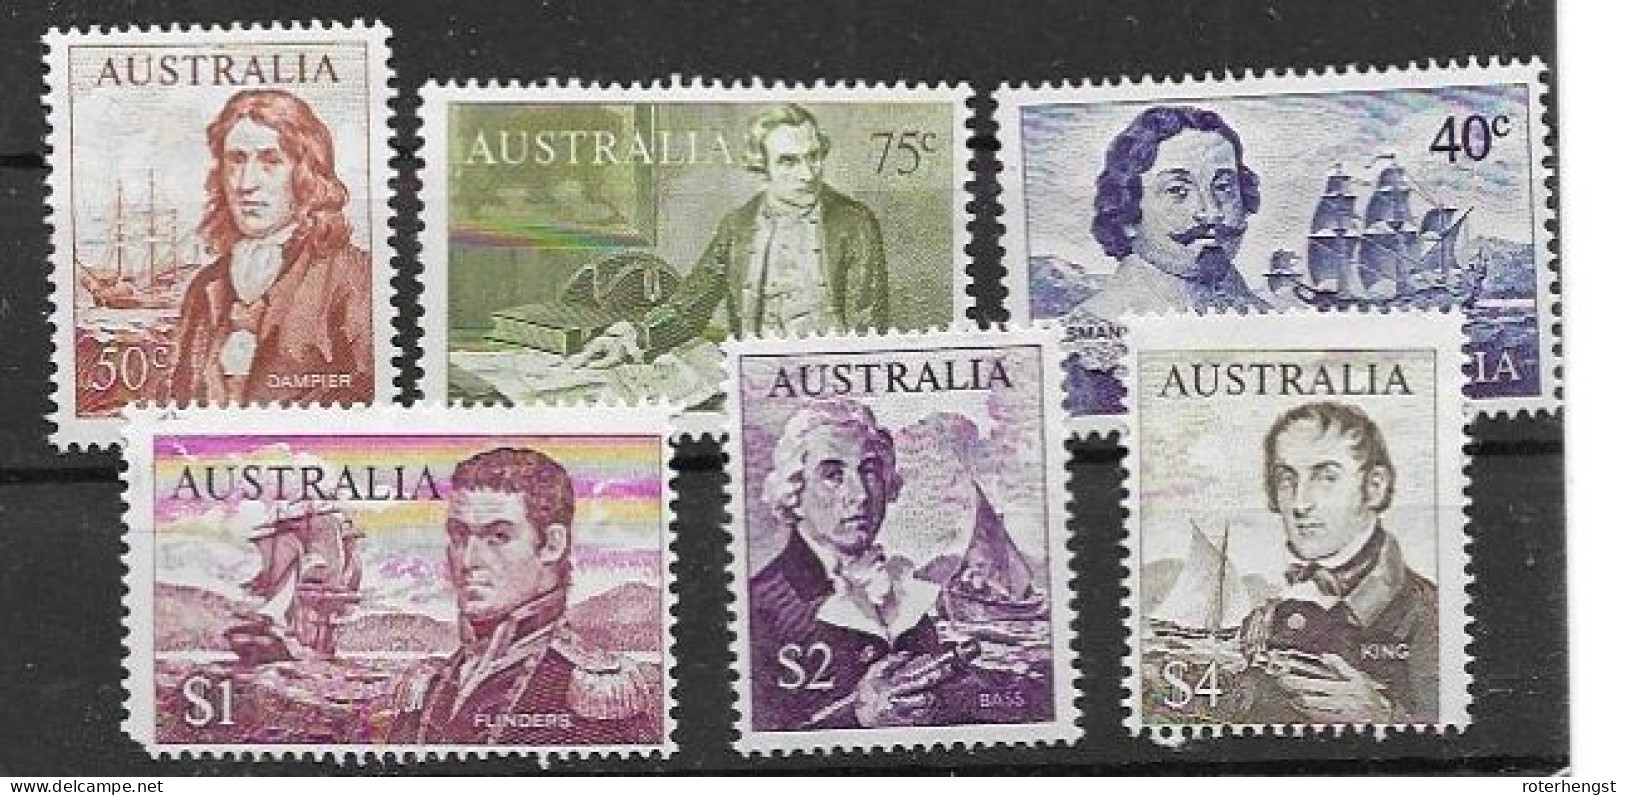 Australia Explorers Complete Set Mh * (45 Euros) But 1$ Is Faulty (missing Corner Perf) 1966 - Neufs